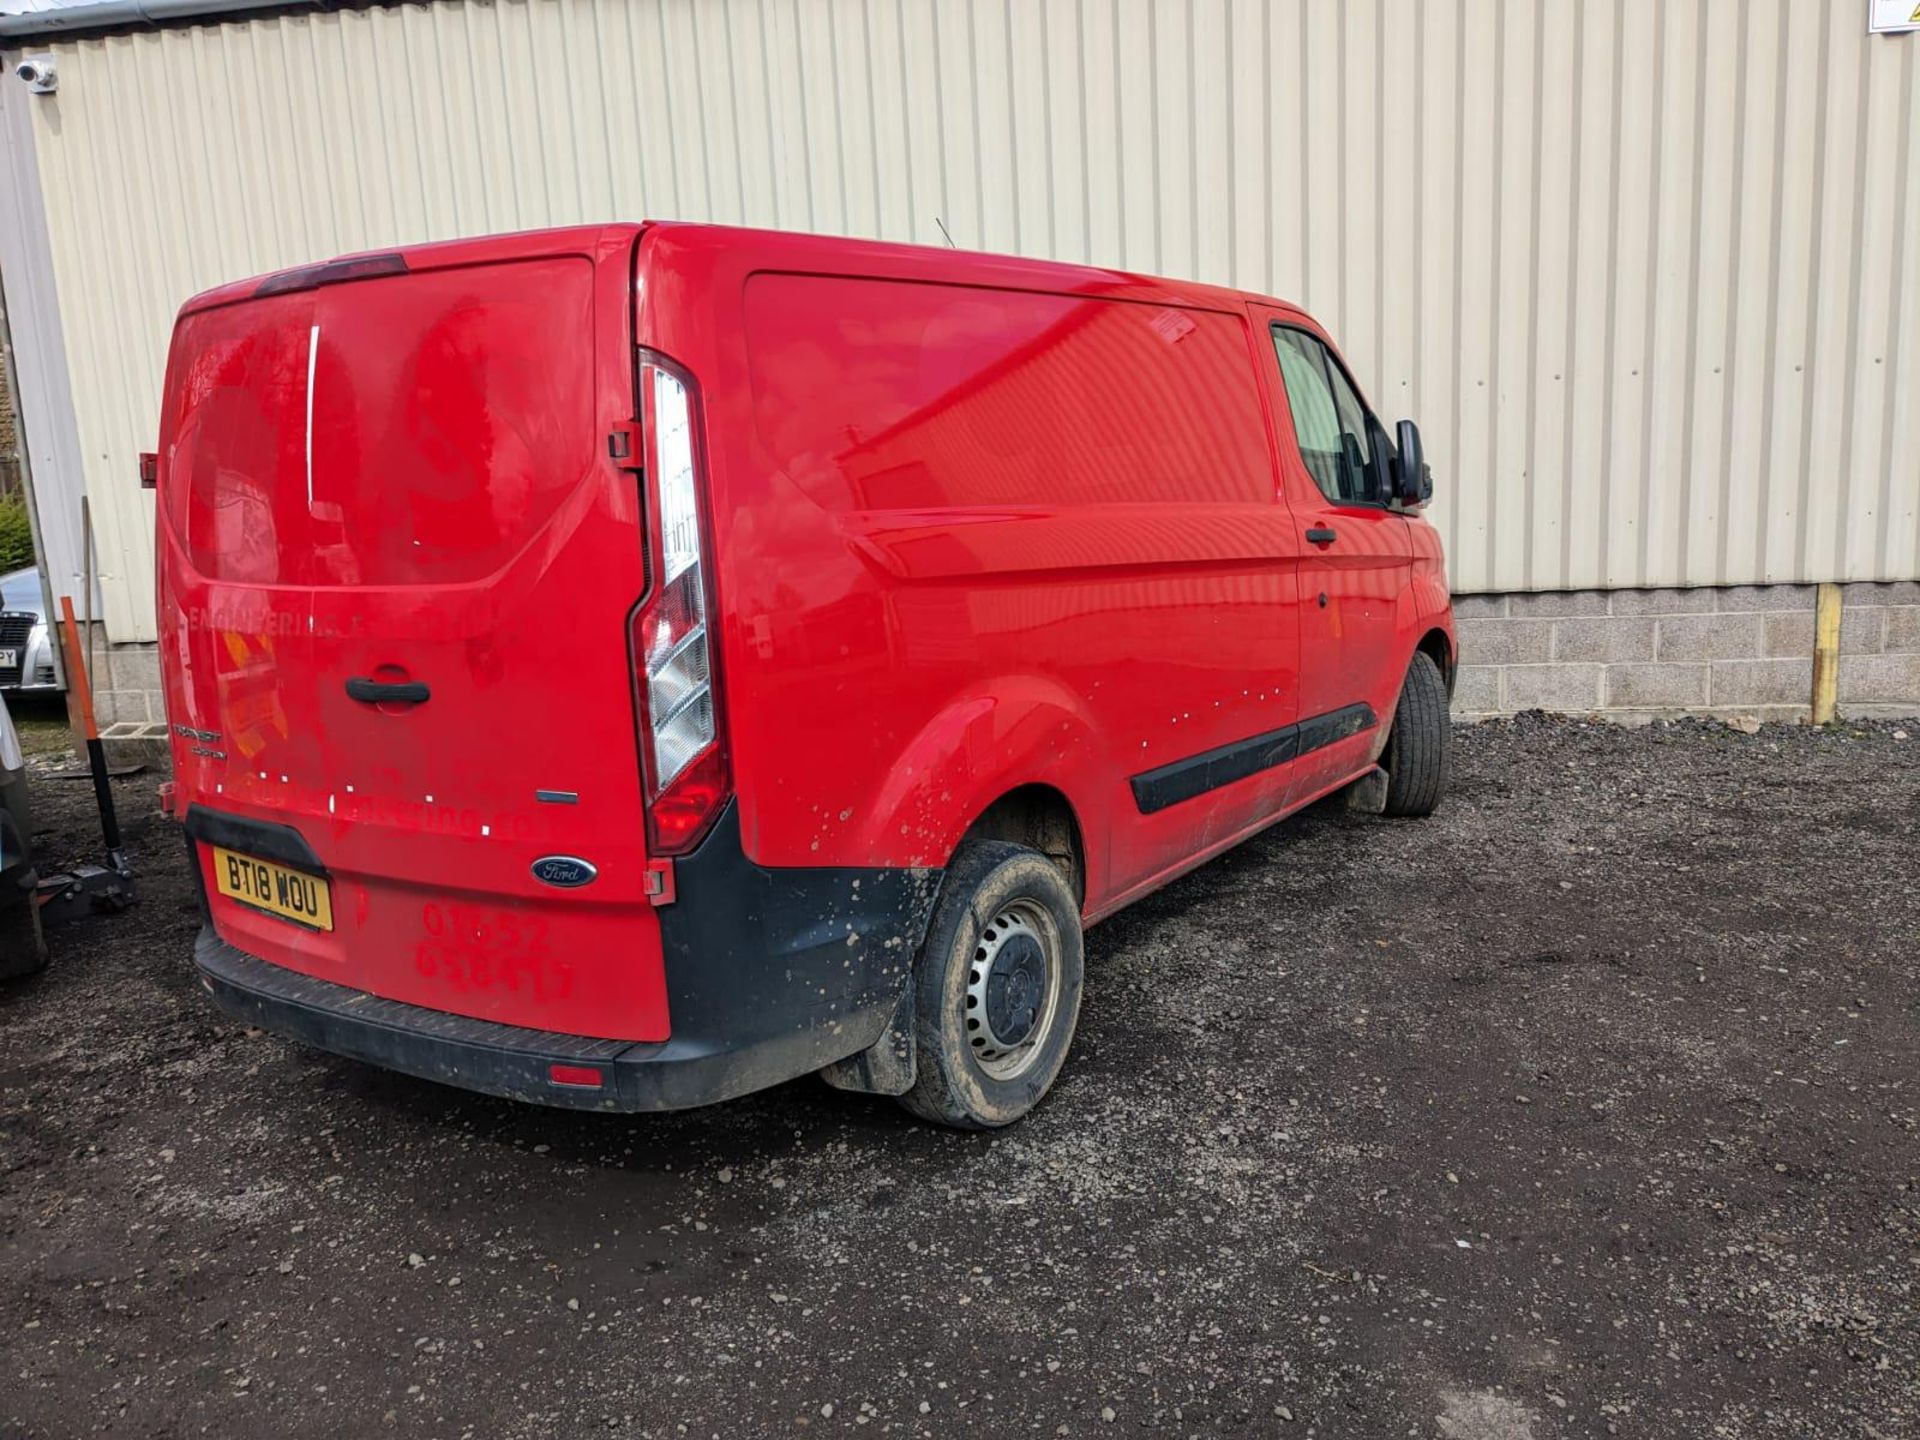 2018 18 FORD TRANSIT CUSTOM PANEL VAN - 96K MILES - EURO 6 - PLY LINED - AIR CON - Image 3 of 3